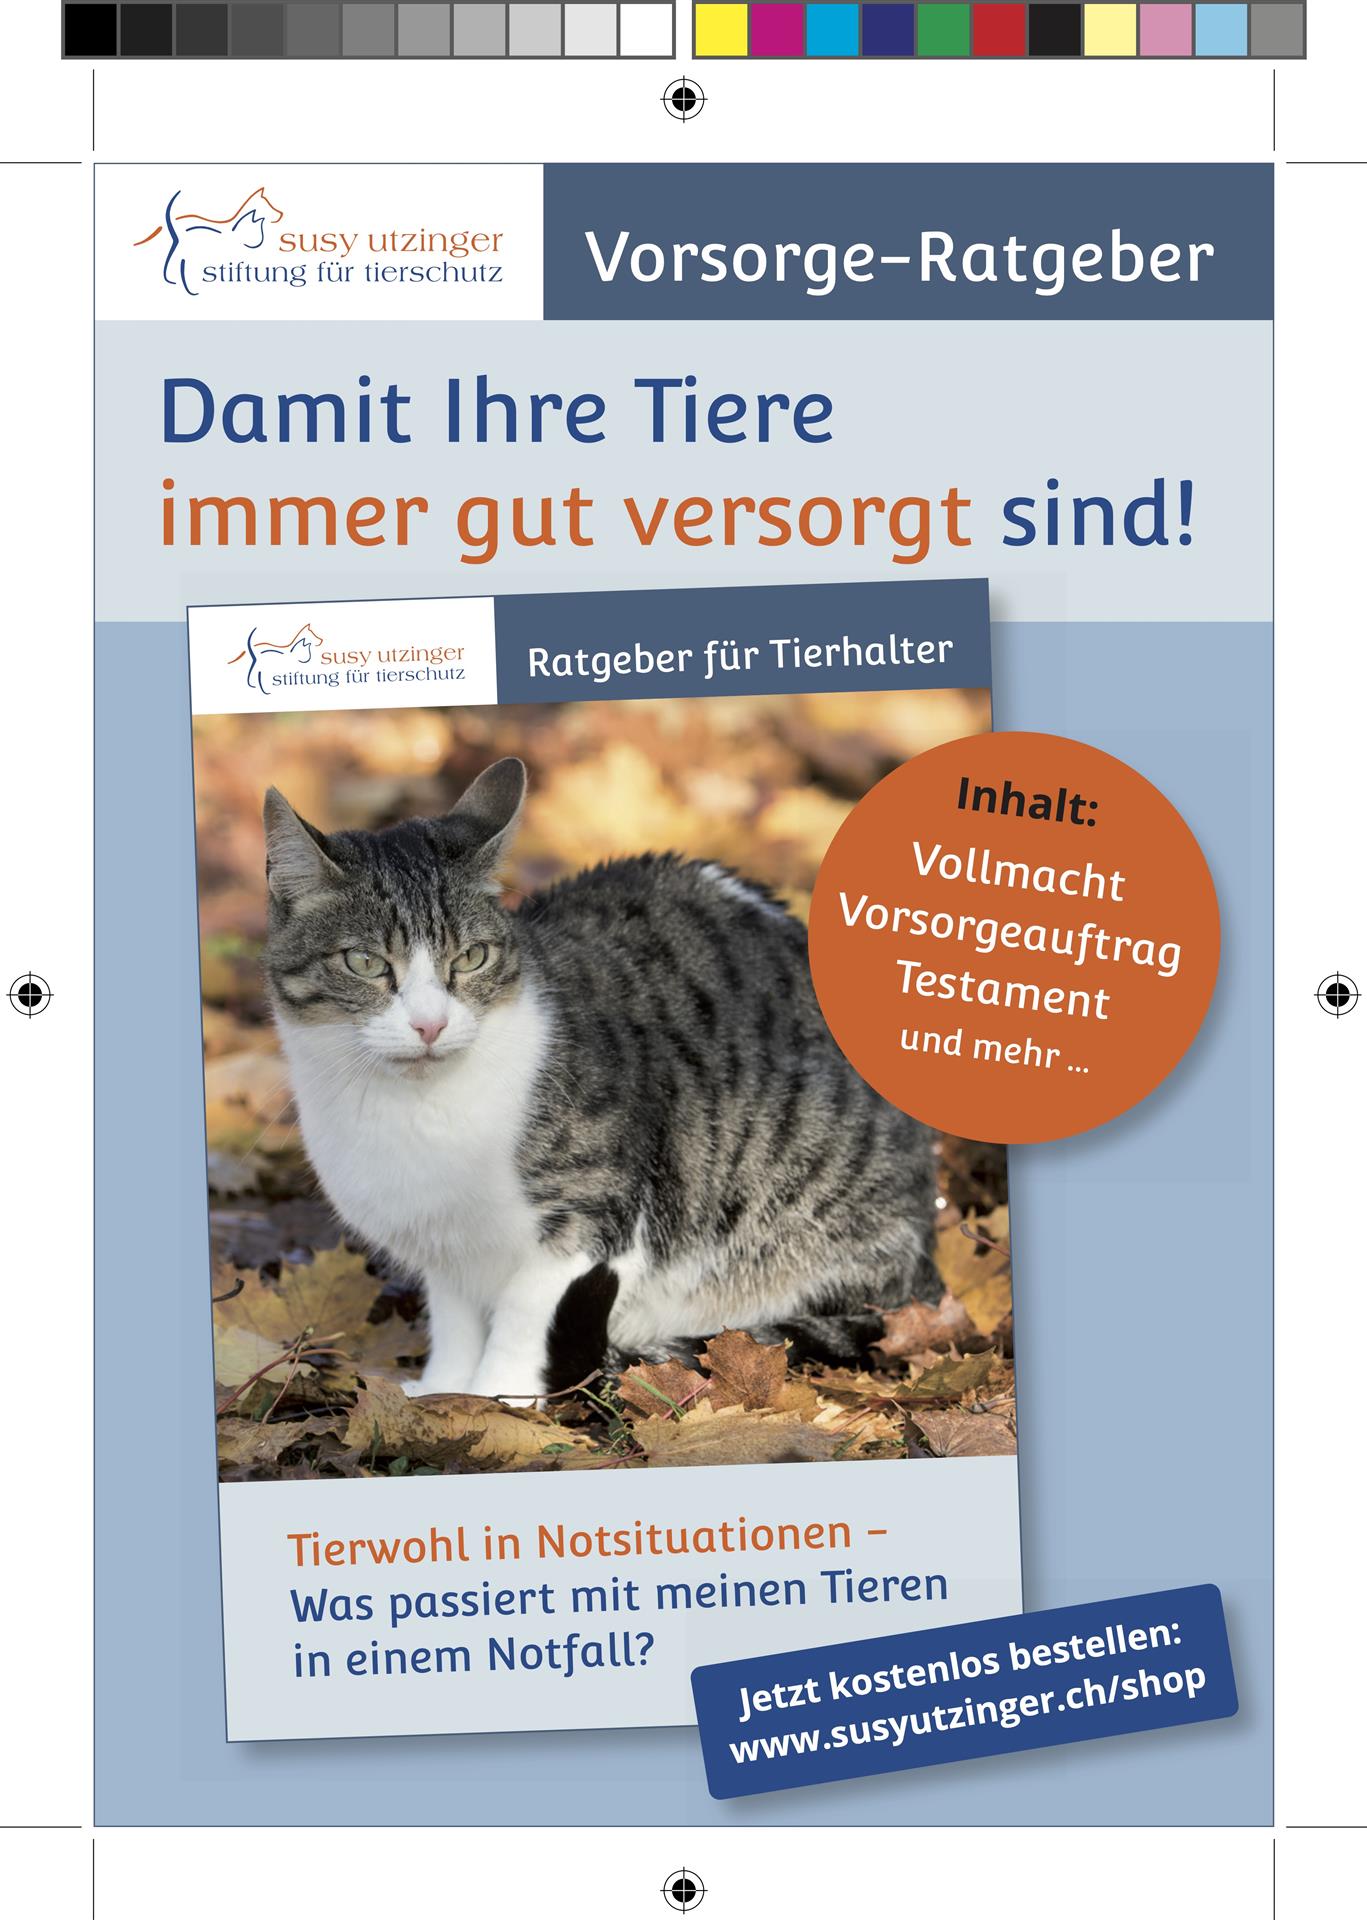 Animal welfare in emergency situations - a guide for pet owners 105x148 (in German only)